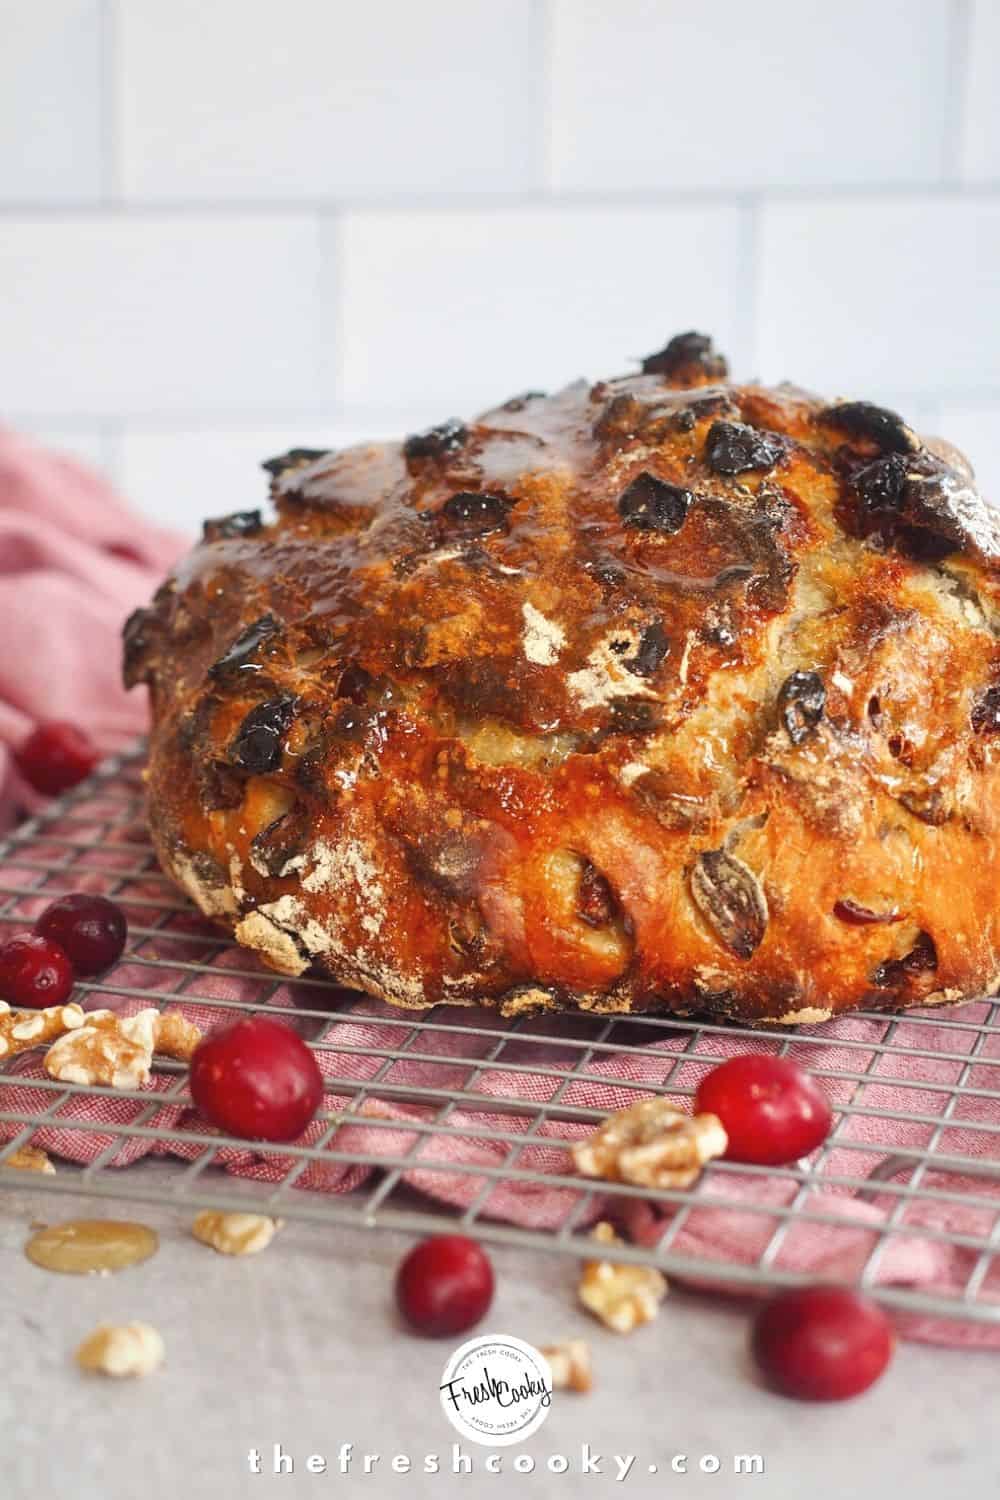 Loaf of freshly baked cranberry walnut bread on cooling rack with red napkin underneath and fresh cranberries and walnuts tossed around.